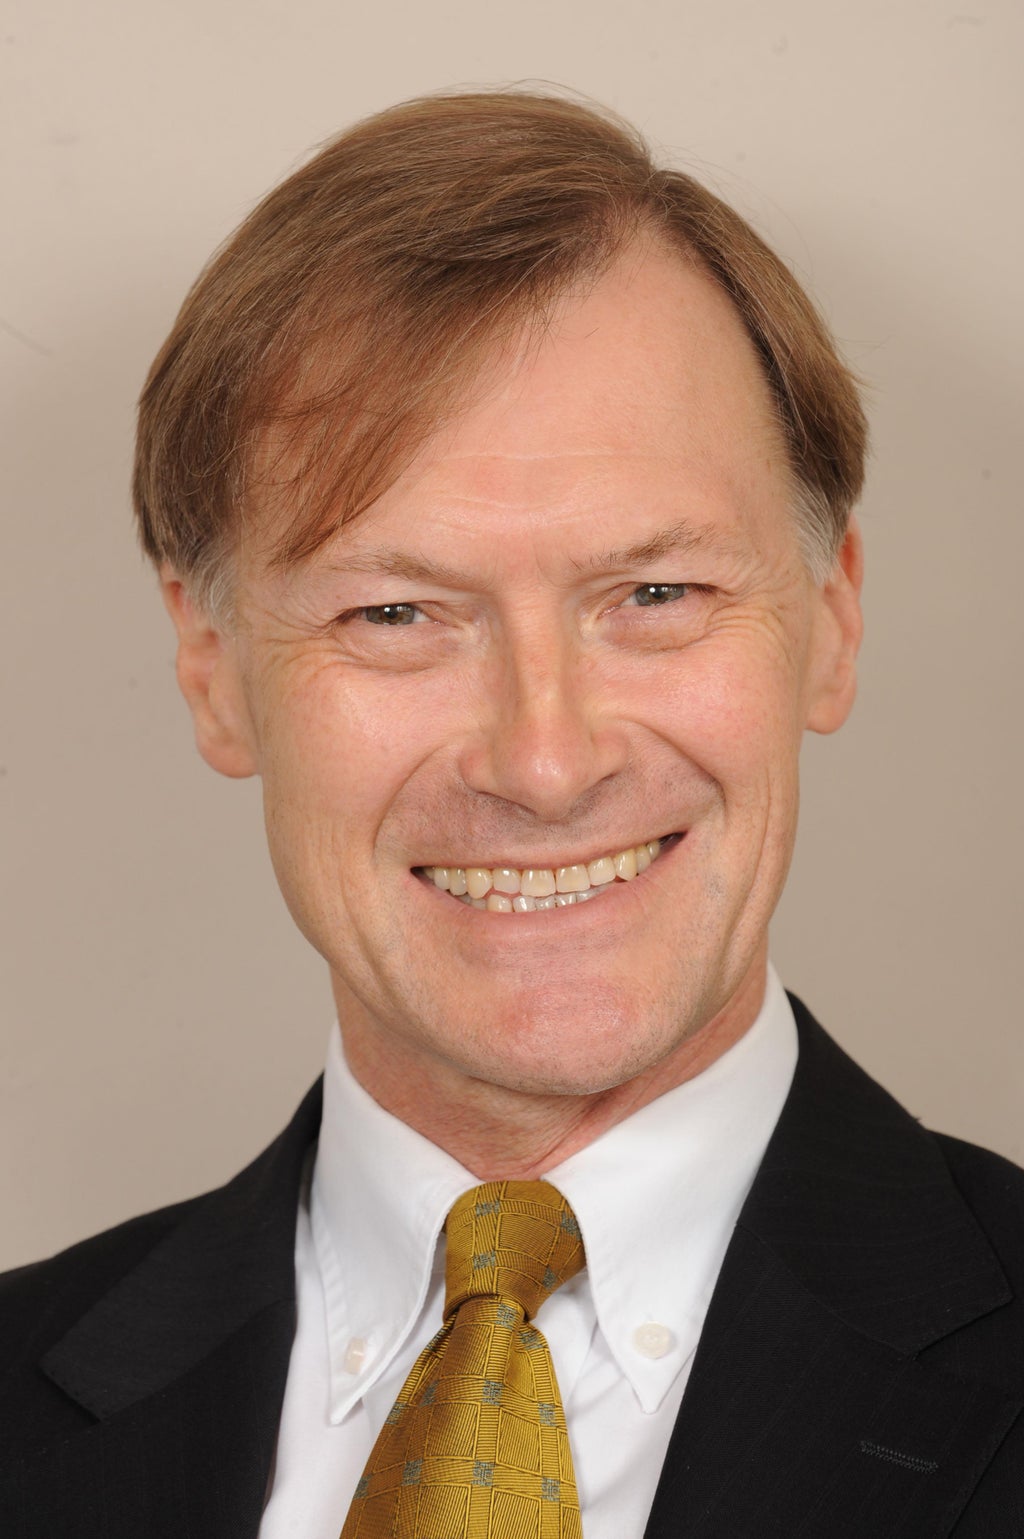 David Amess: MP ‘stabbed multiple times’ at constituency surgery